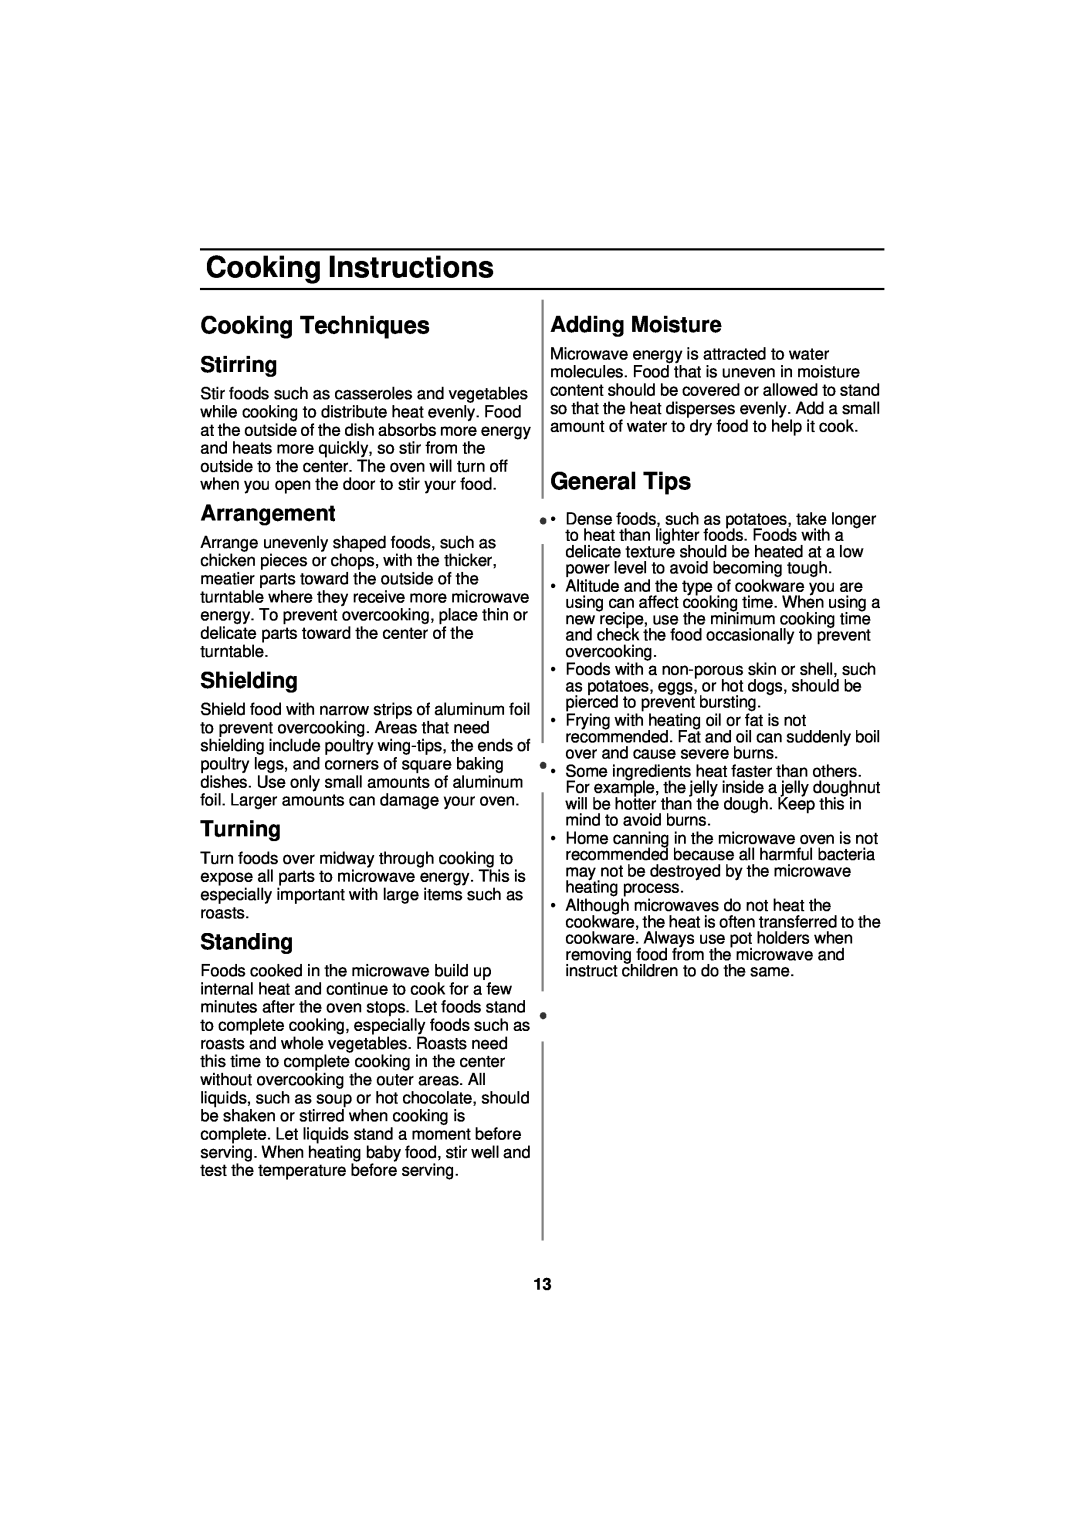 Samsung DE68-01931A-01 manual Cooking Techniques, General Tips, Stirring, Arrangement, Shielding, Turning, Standing 